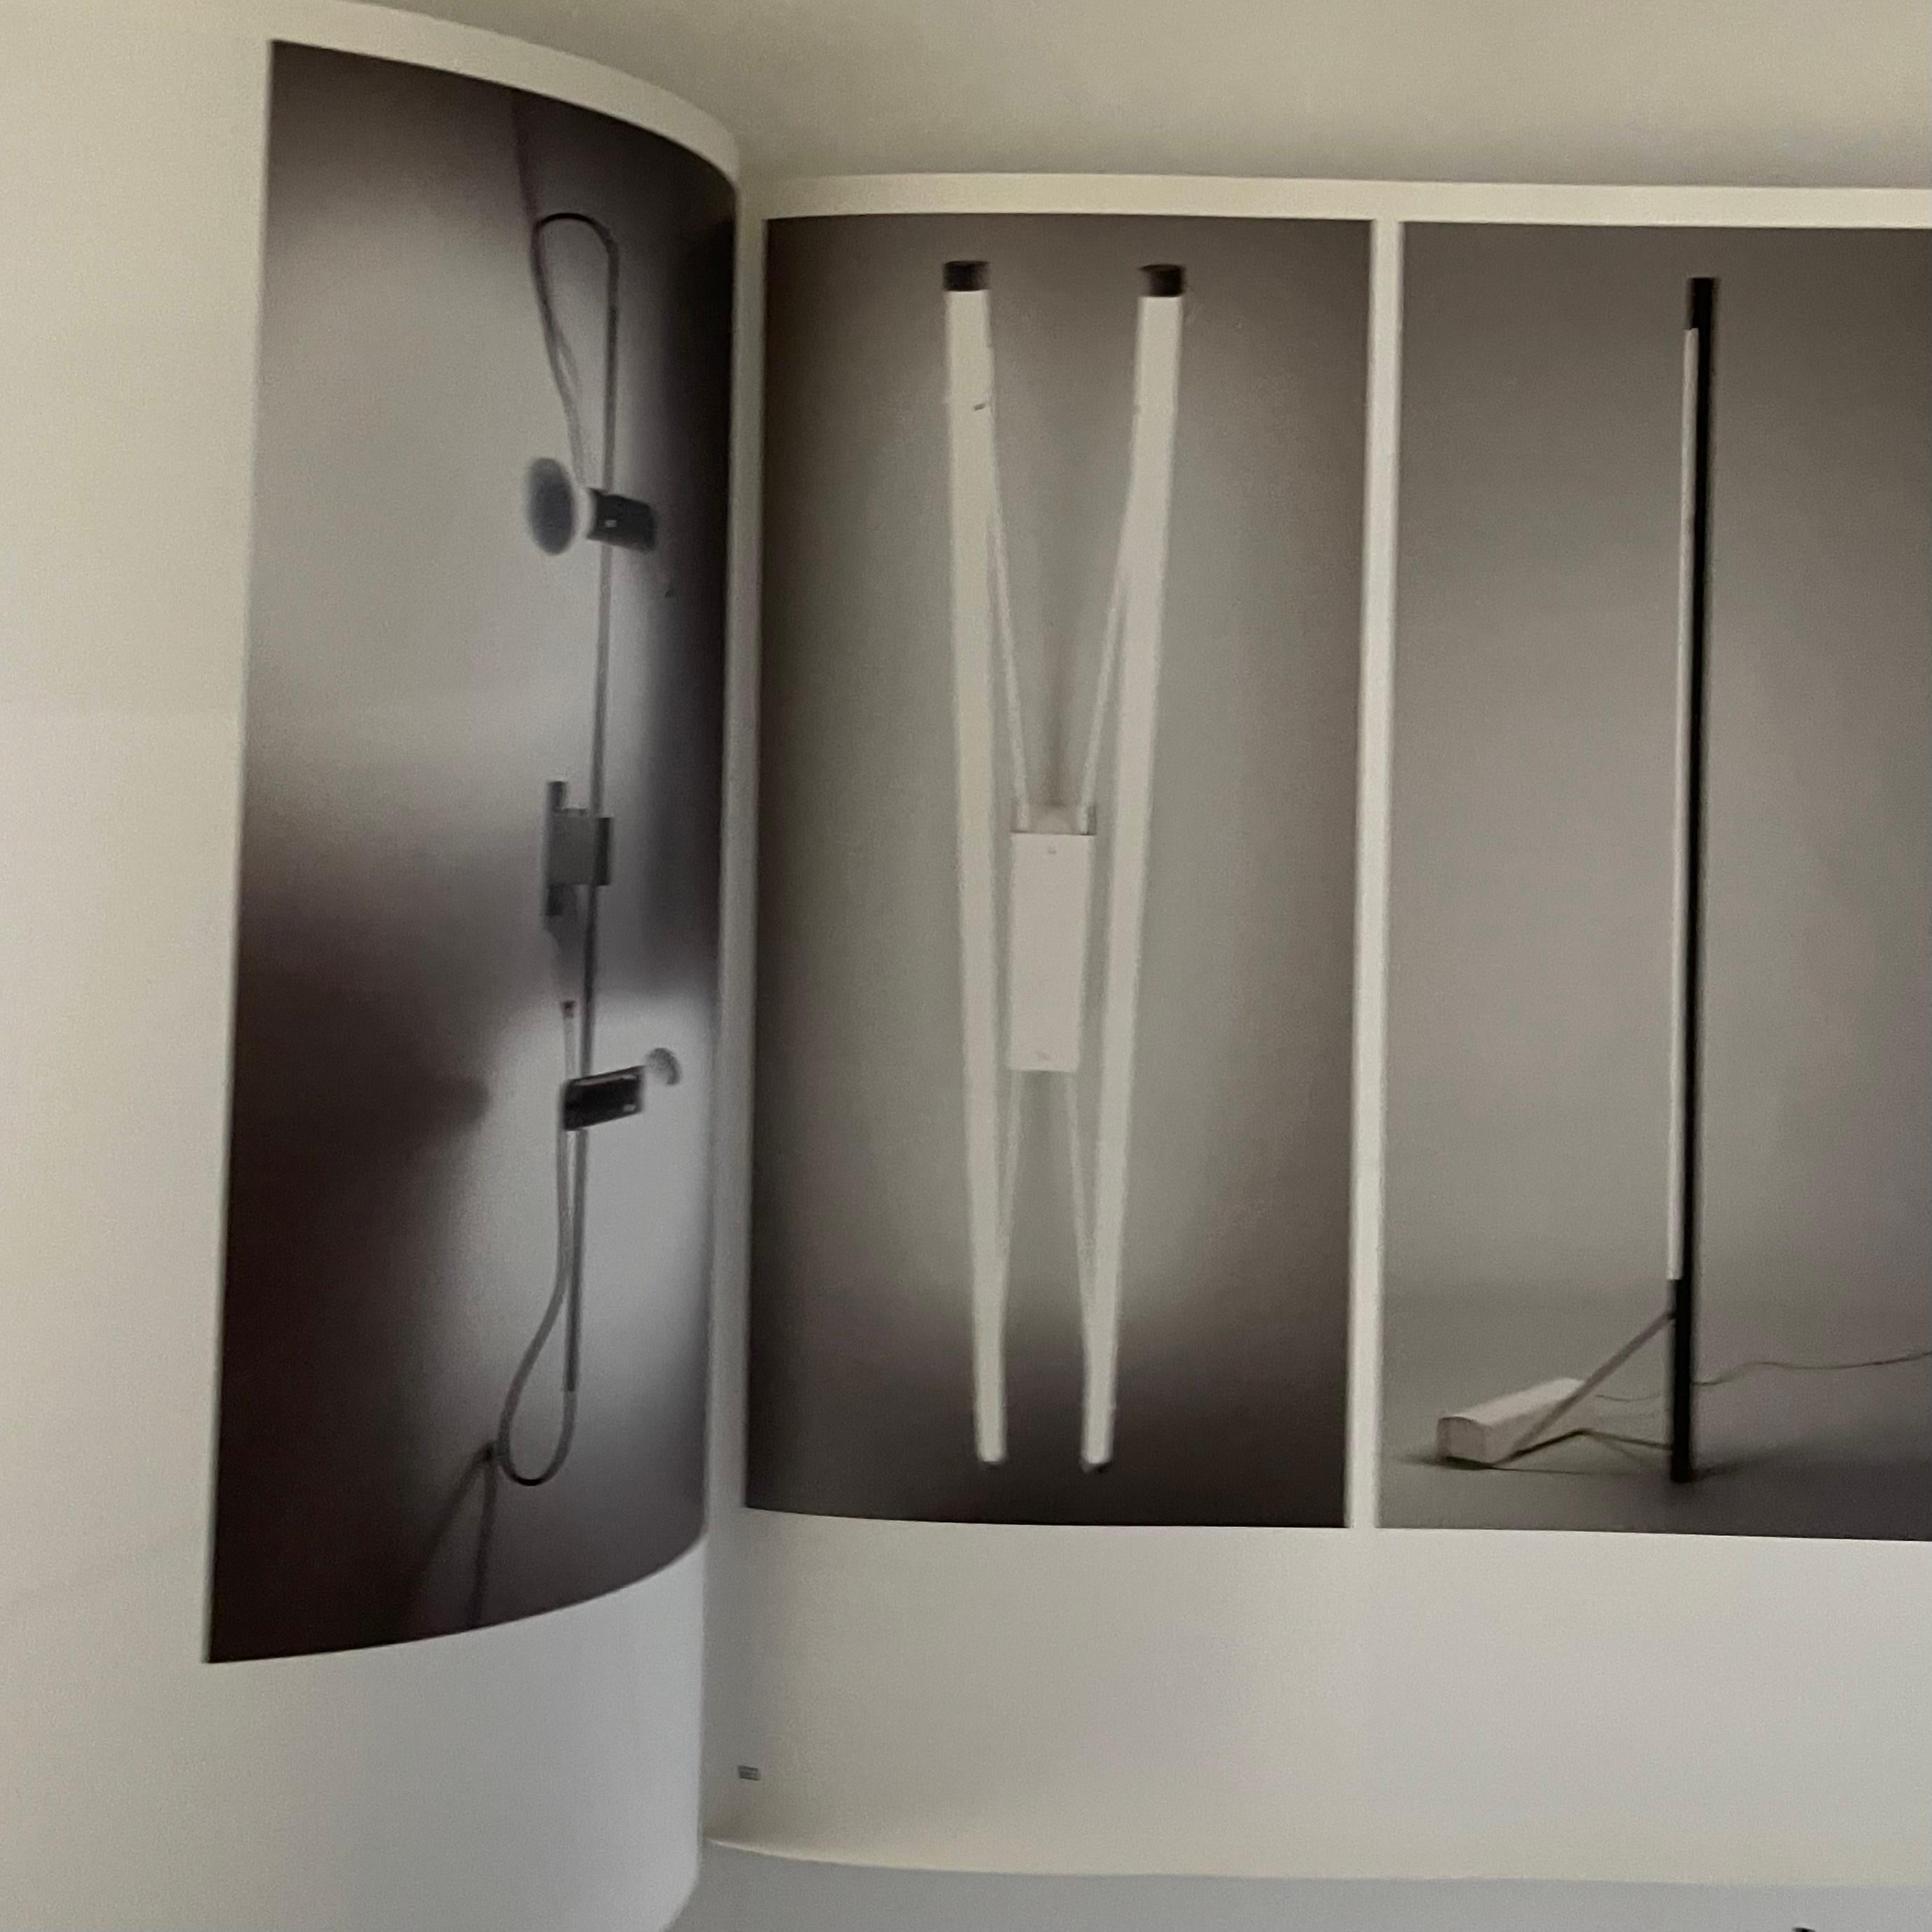 1st Edition published by JRP/ Ringier in collaboration with Galerie Kreo Paris. English text
This amazing lighting book offers a comprehensive look at 30 years of collecting by Lemence and Didier Krentowski featuring some of the most iconic designs